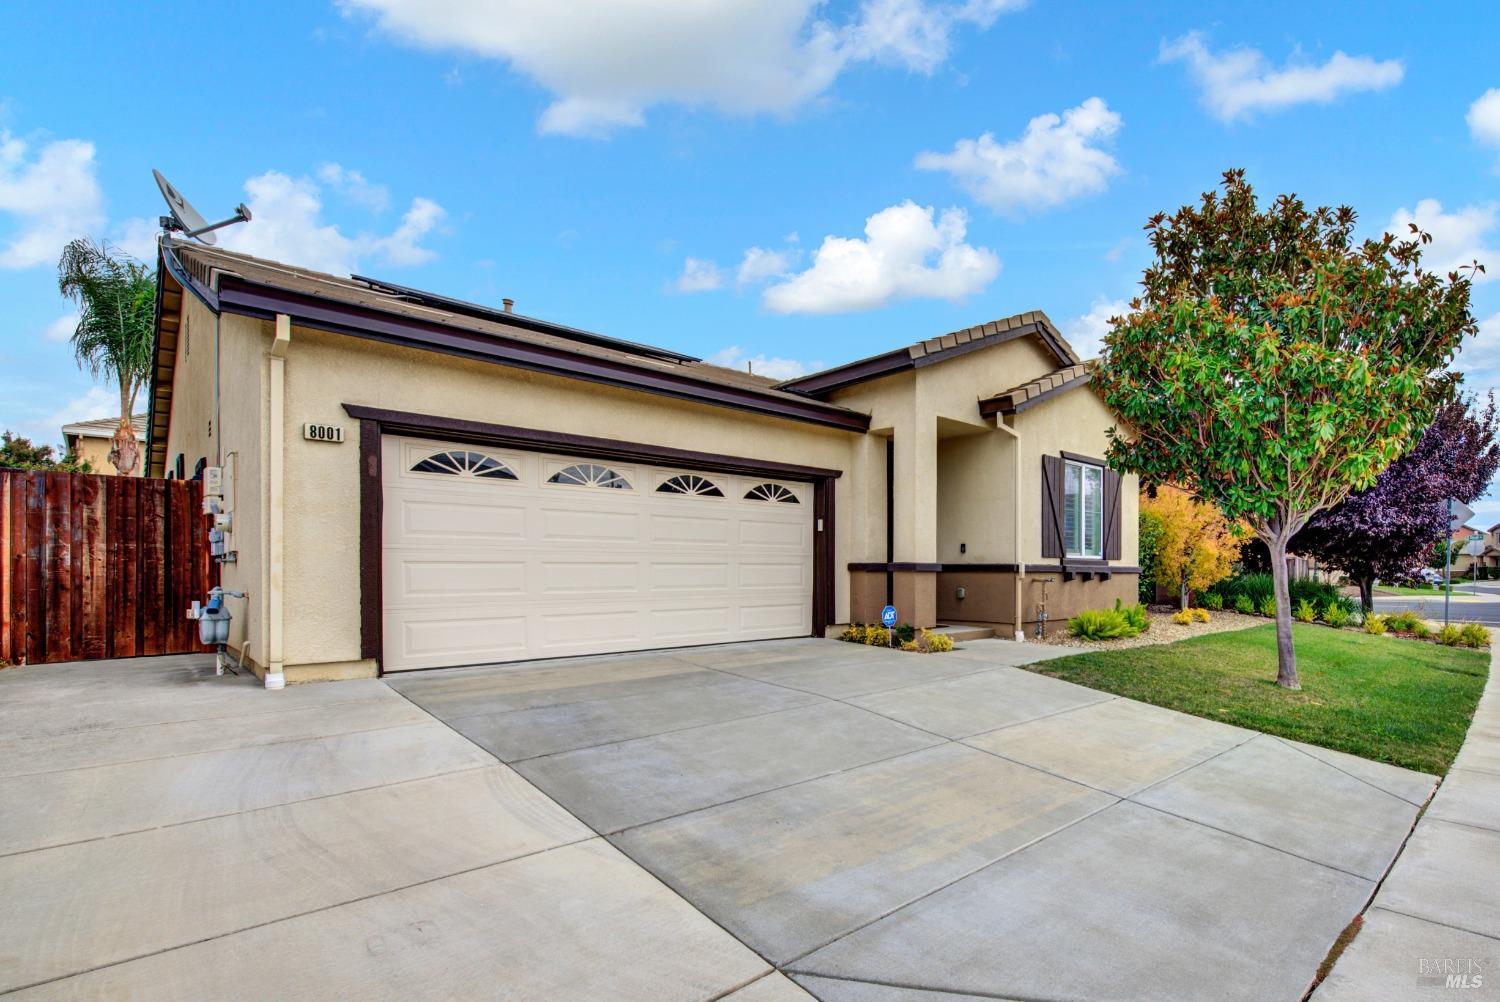 Photo of 8001 Finchley Ct in Vacaville, CA